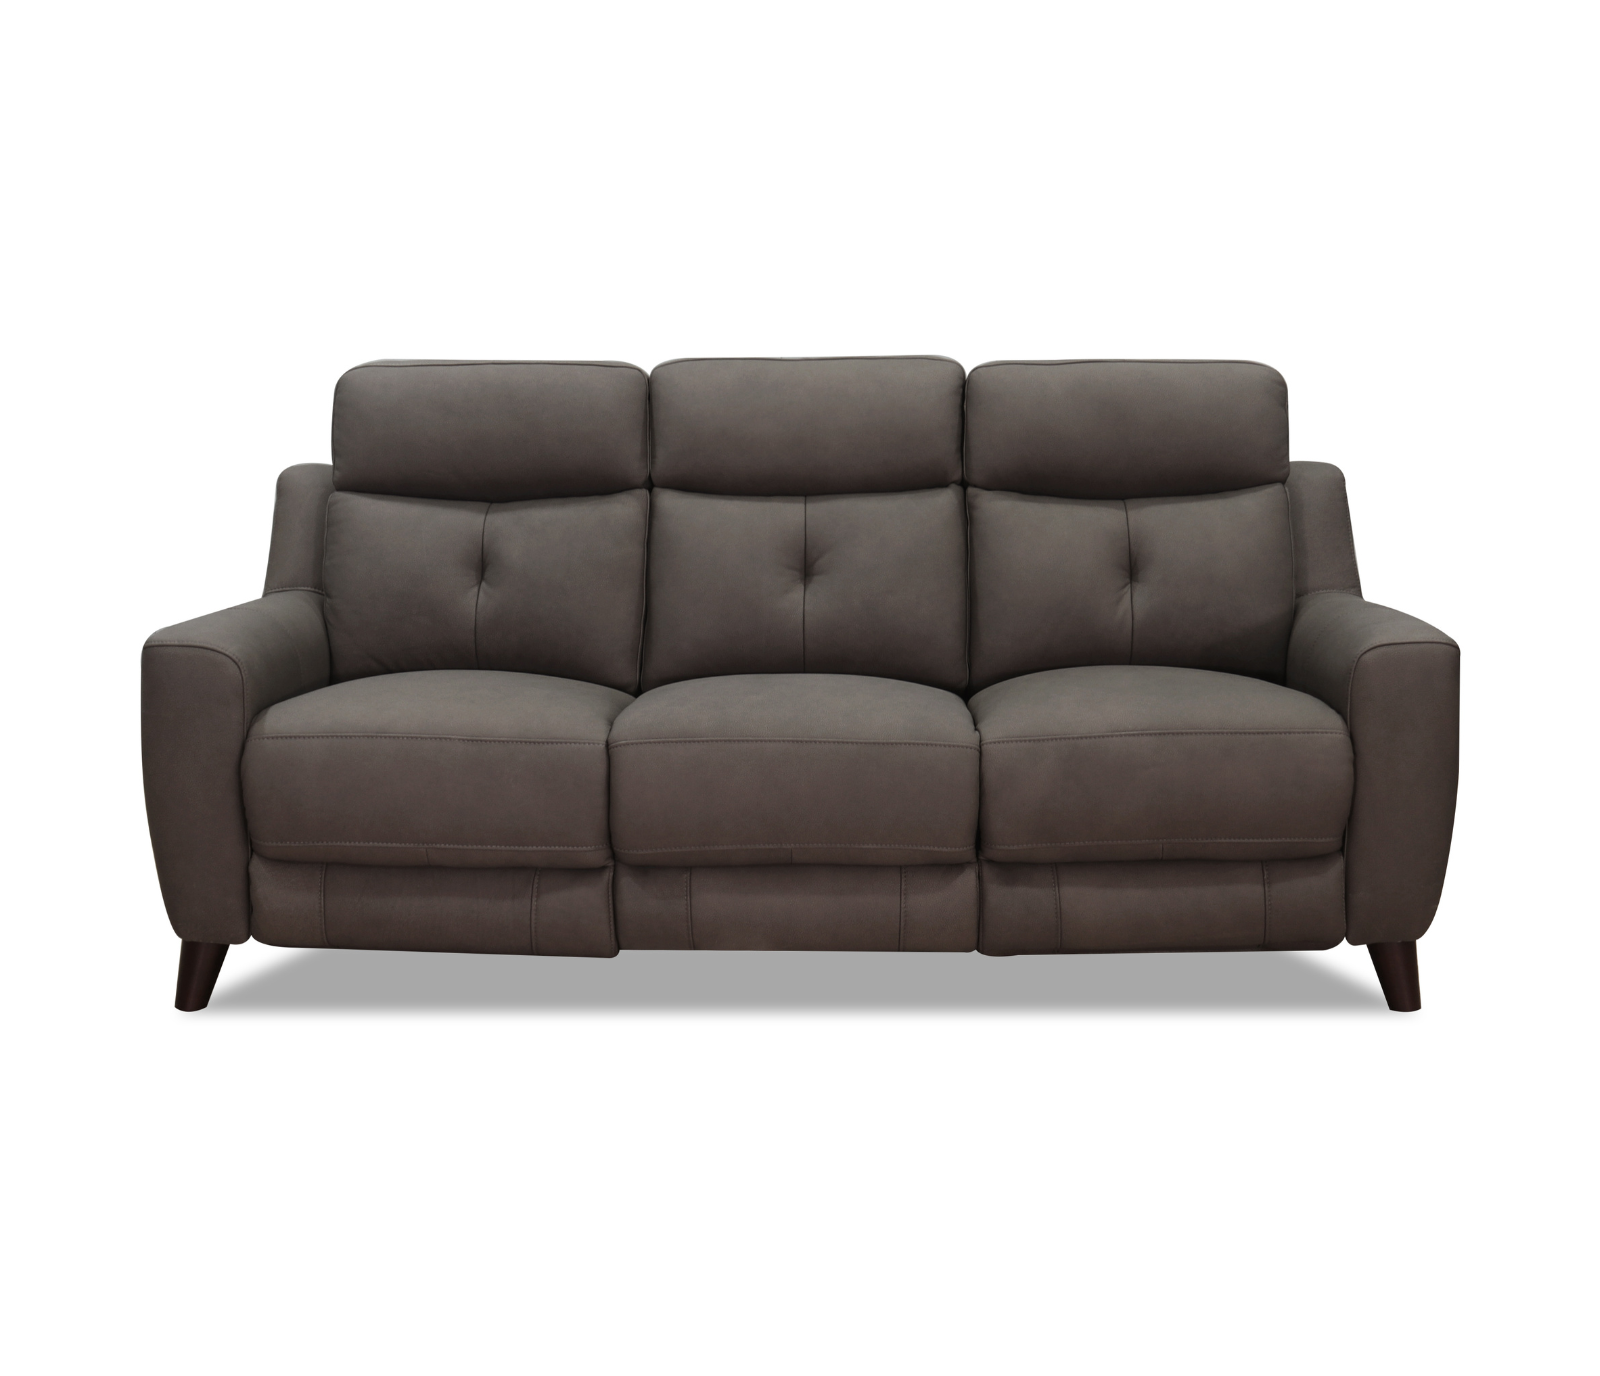 Ritchie Sofa - Power Reclining w/ Power Headrests - Chocolate Leather